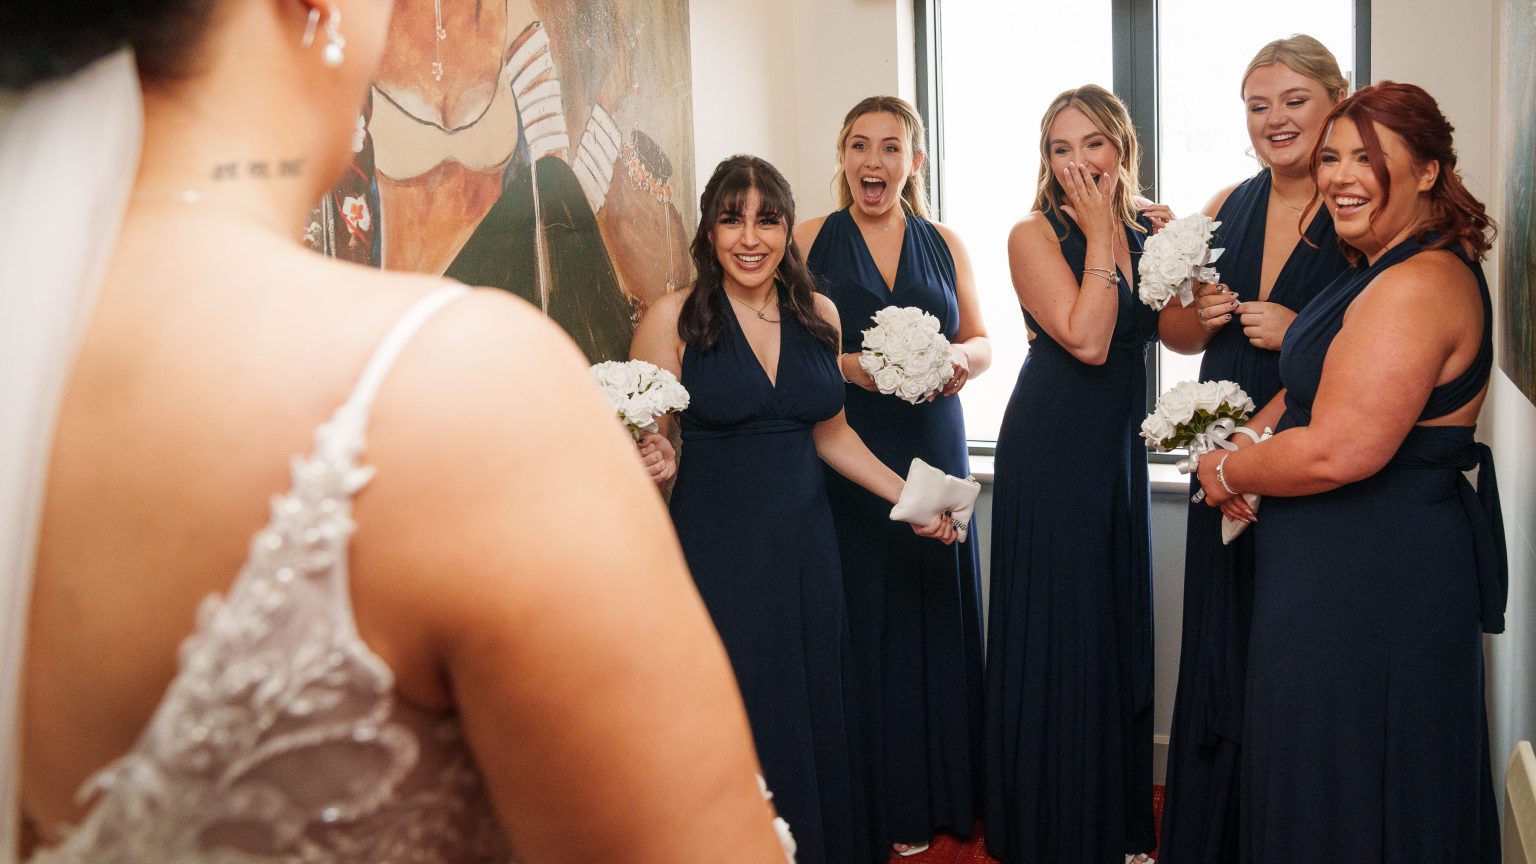 a wedding photograph from a customer's wedding photography gallery; bridesmaids smile and laugh at a dress reveal